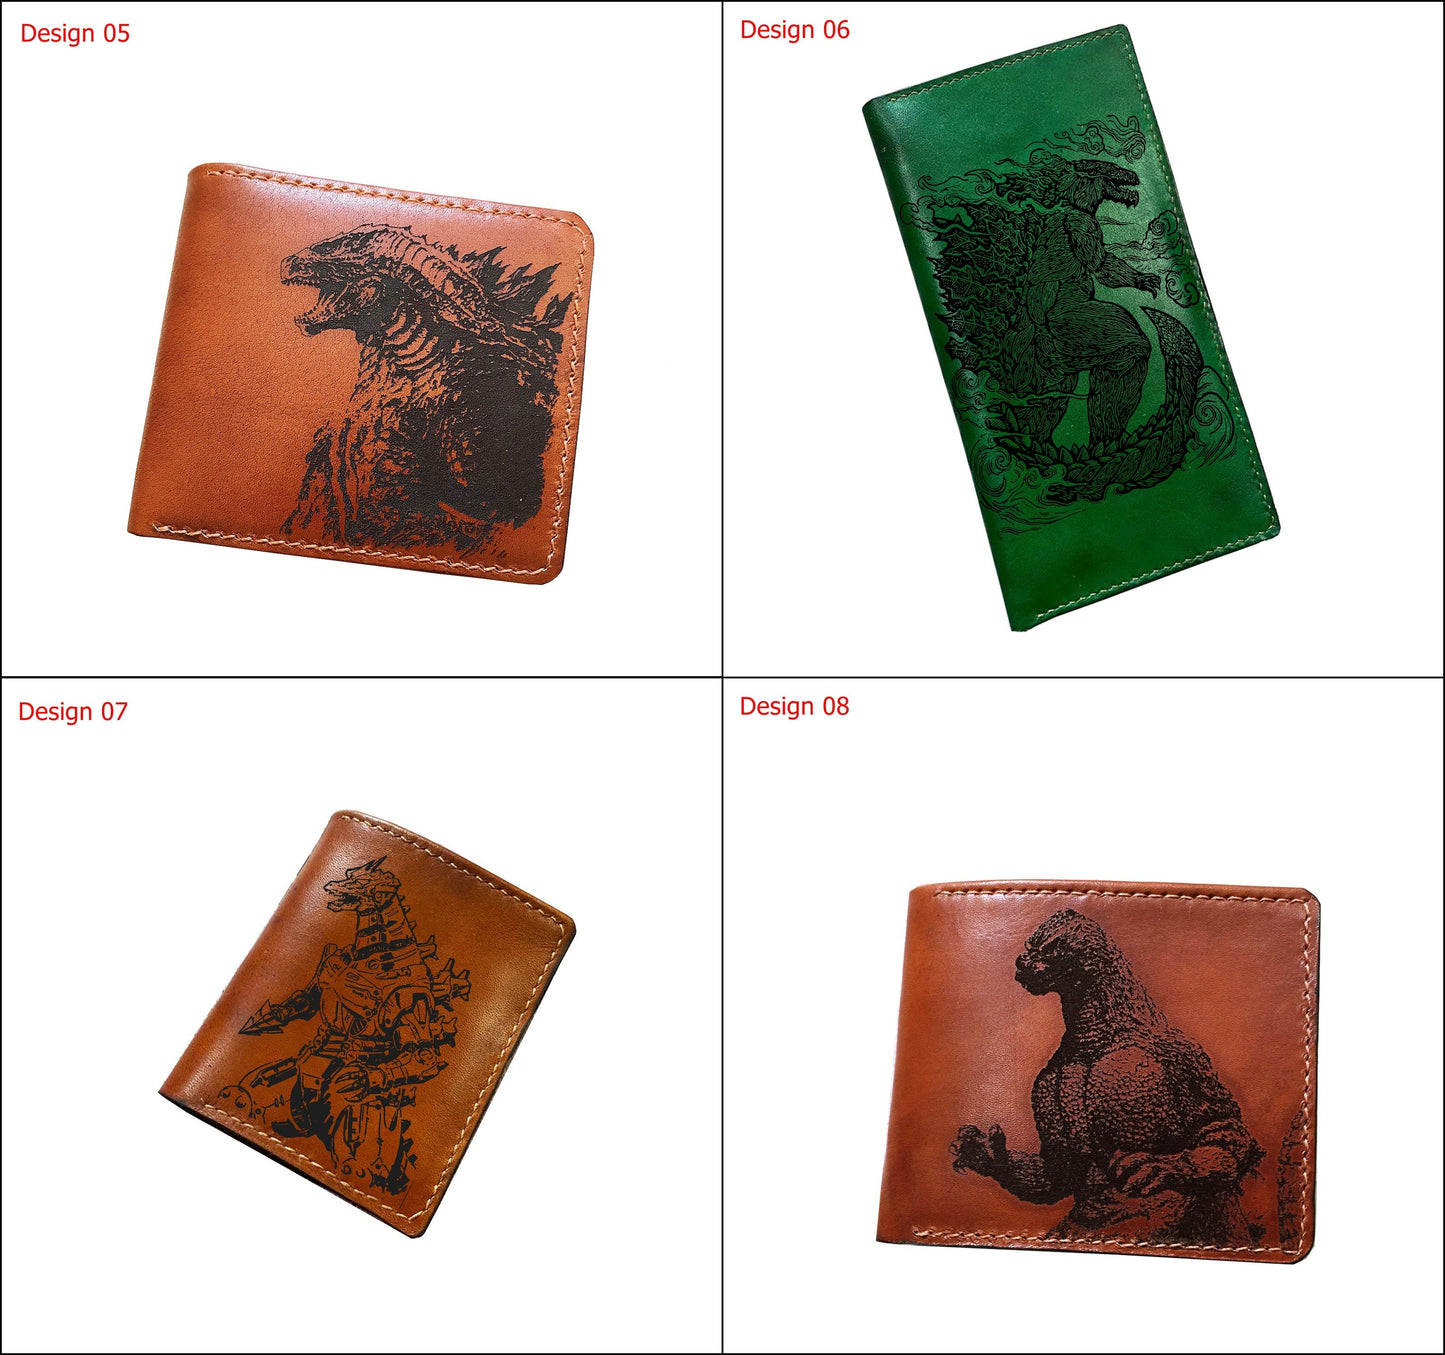 Mayan Corner - Mechagodzilla leather bifold wallet, customized leather gift for him, monster leather wallet